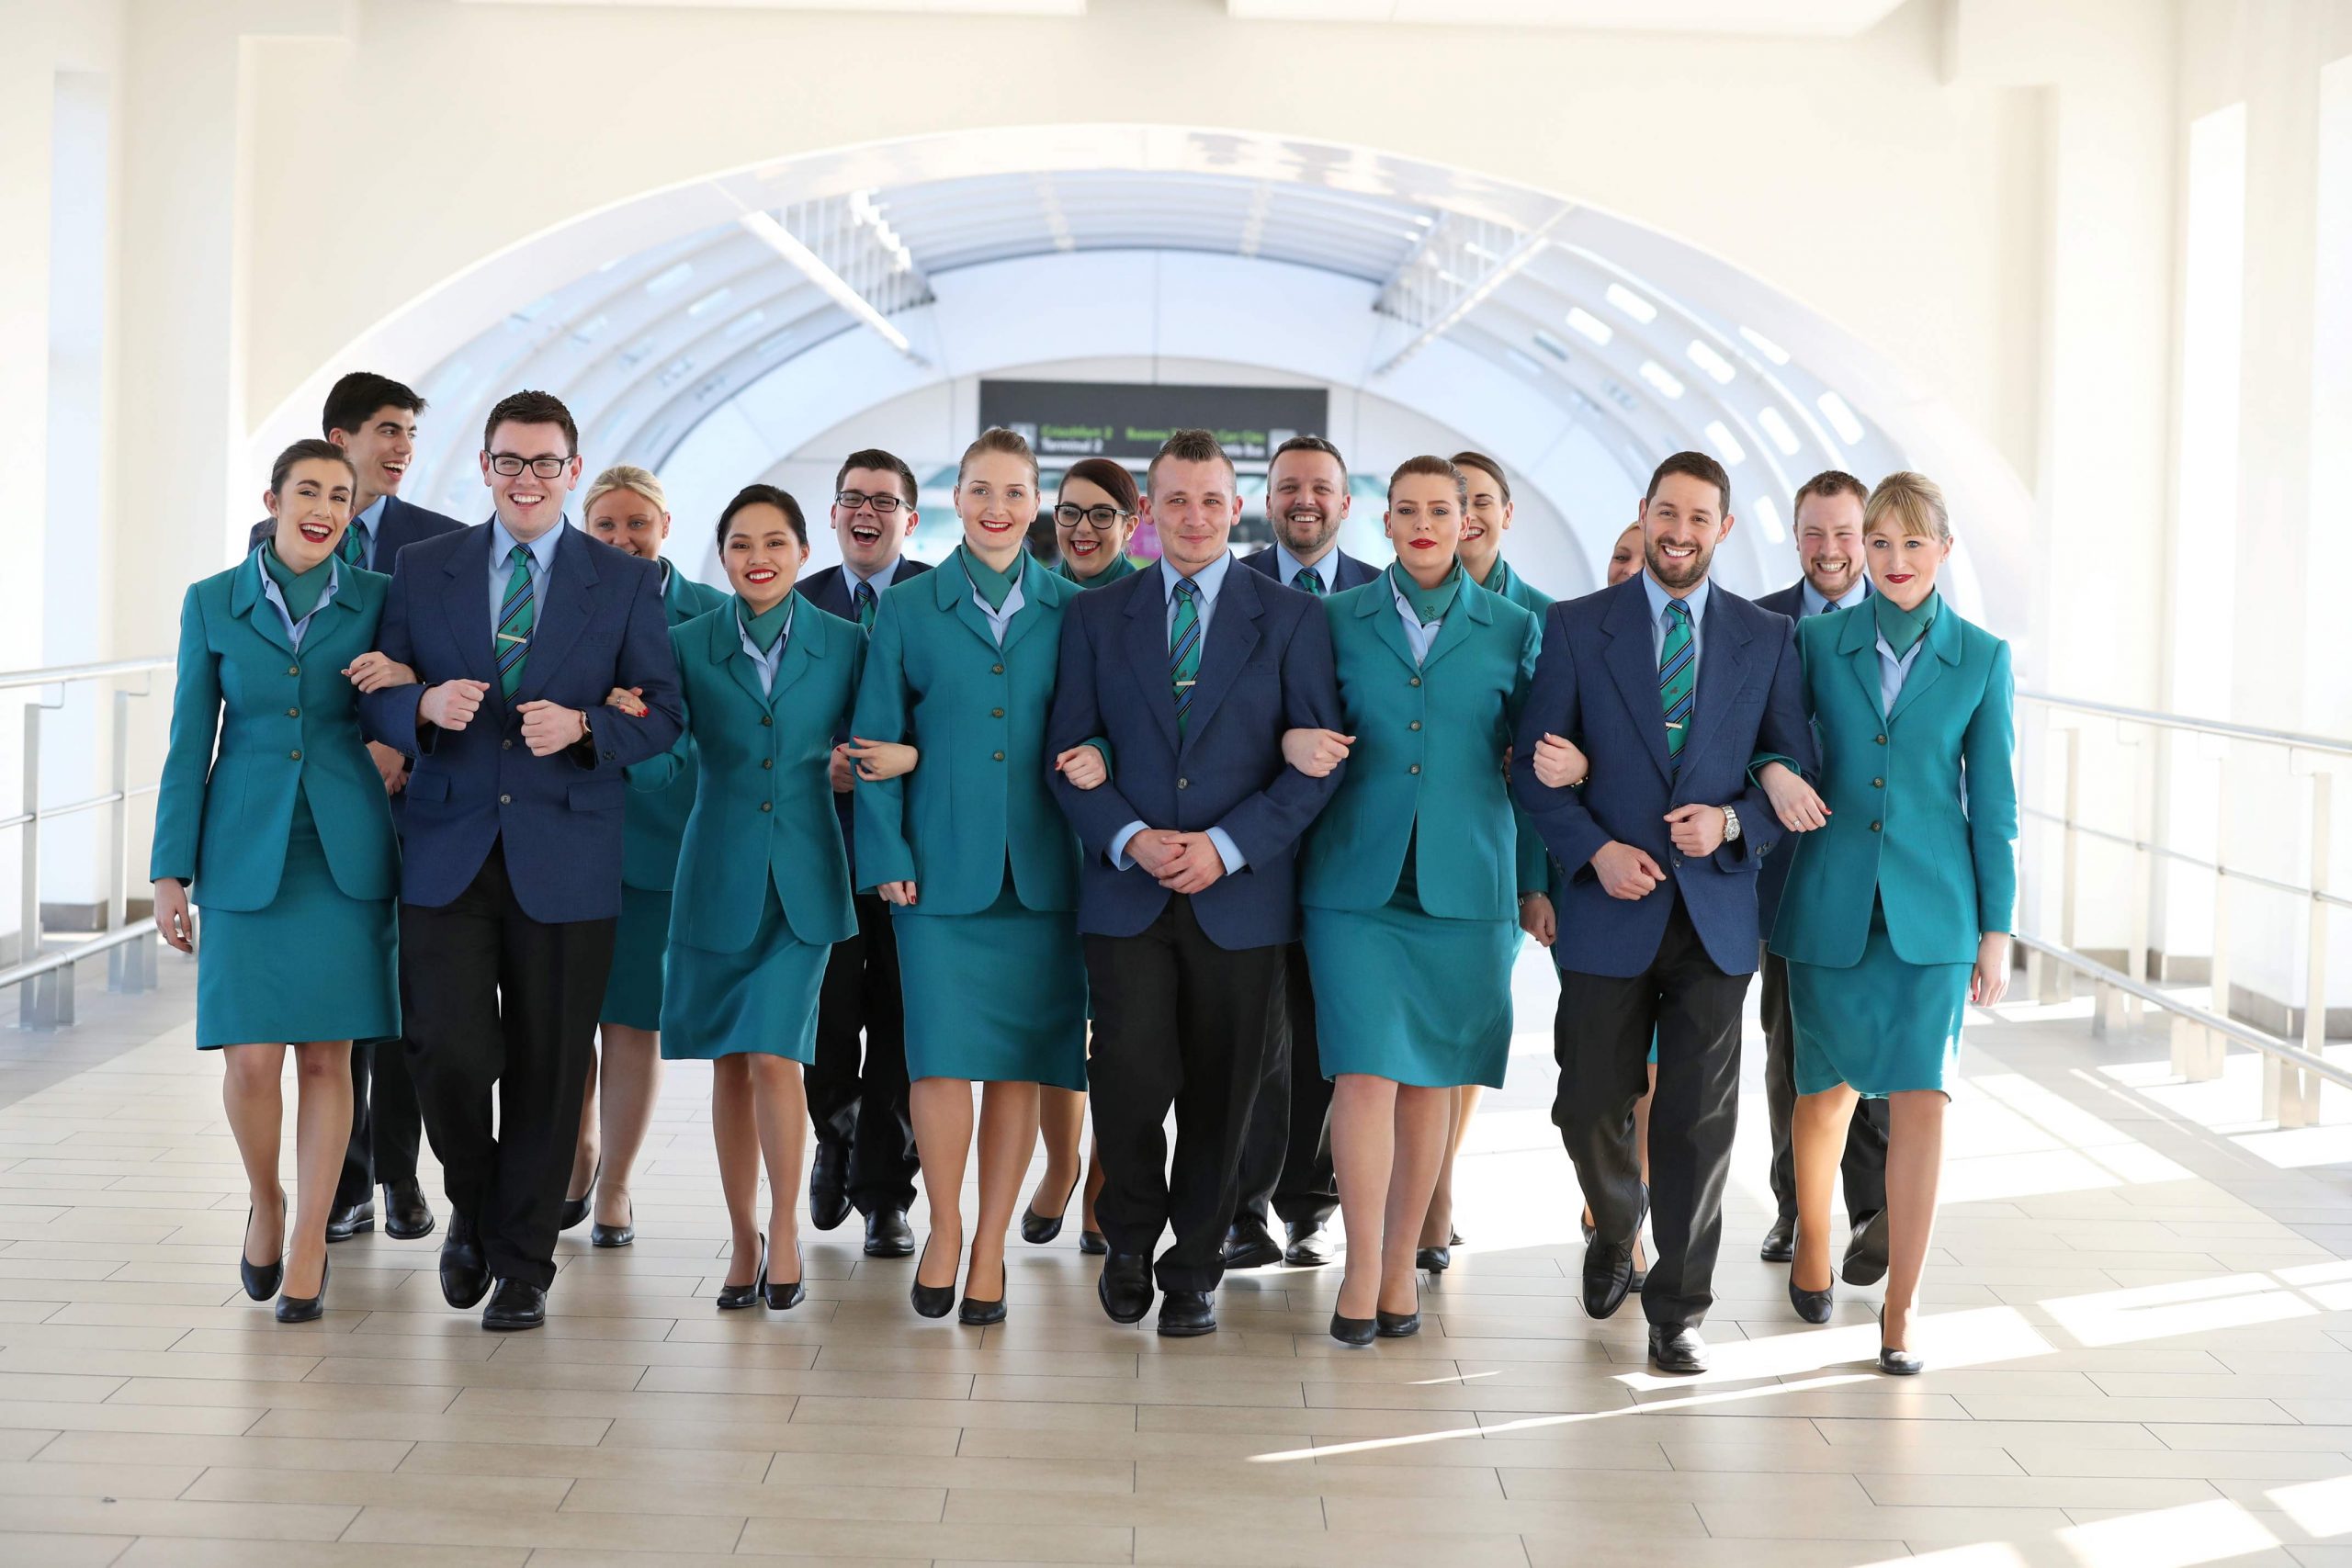 Aer Lingus Launches Big Cabin Crew Recruitment Drive for Dublin and Cork Bases